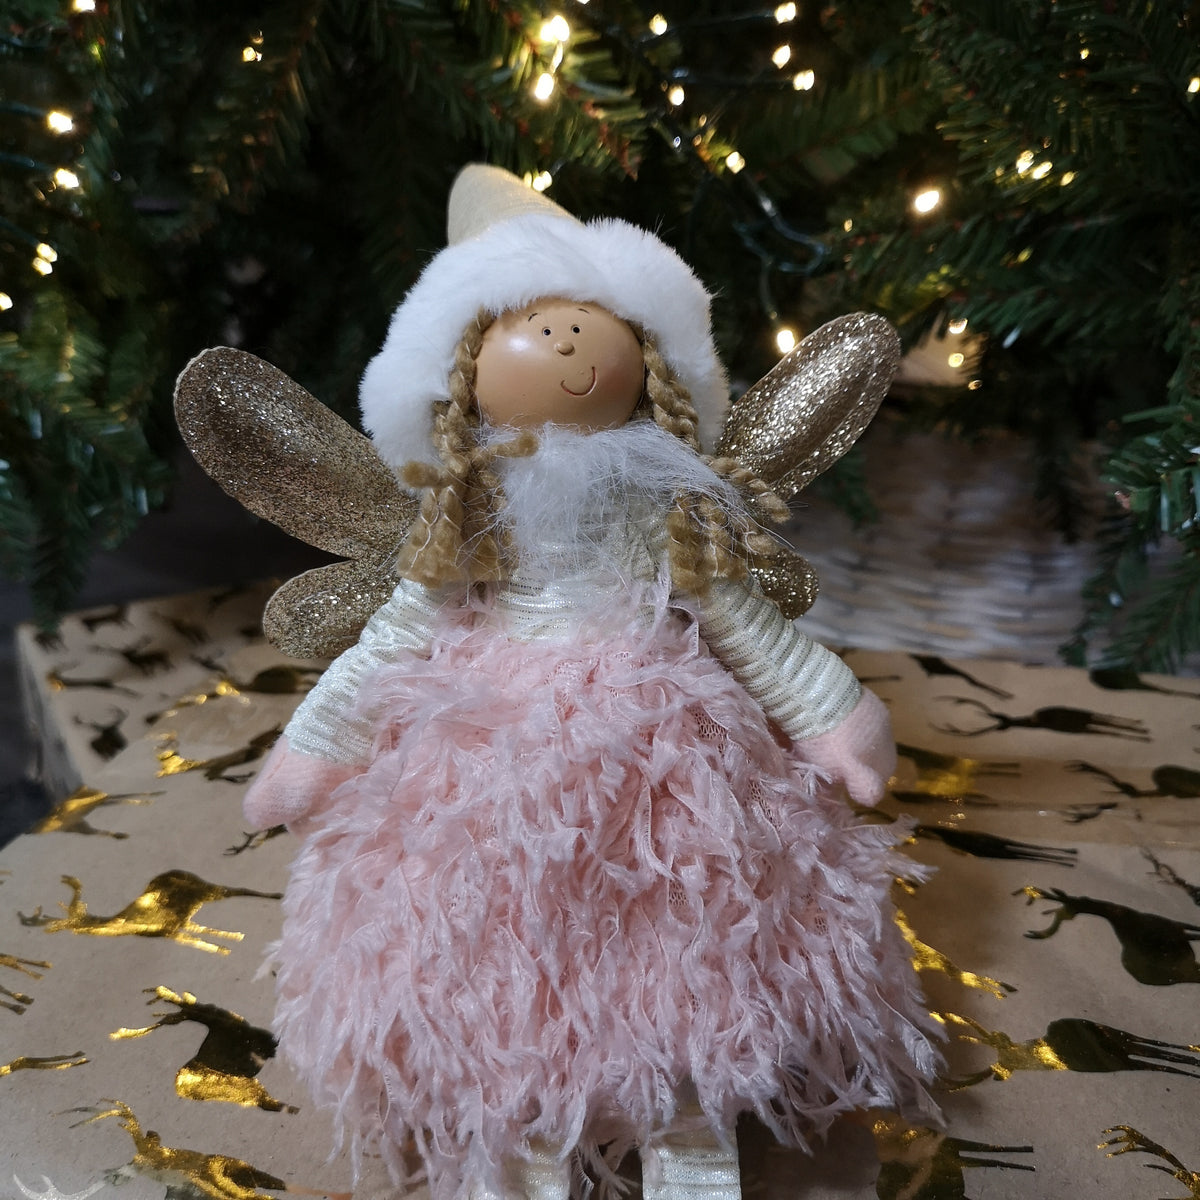 48cm Premier Christmas Sitting Angel Decoration with Dangly Legs in Pink & Gold